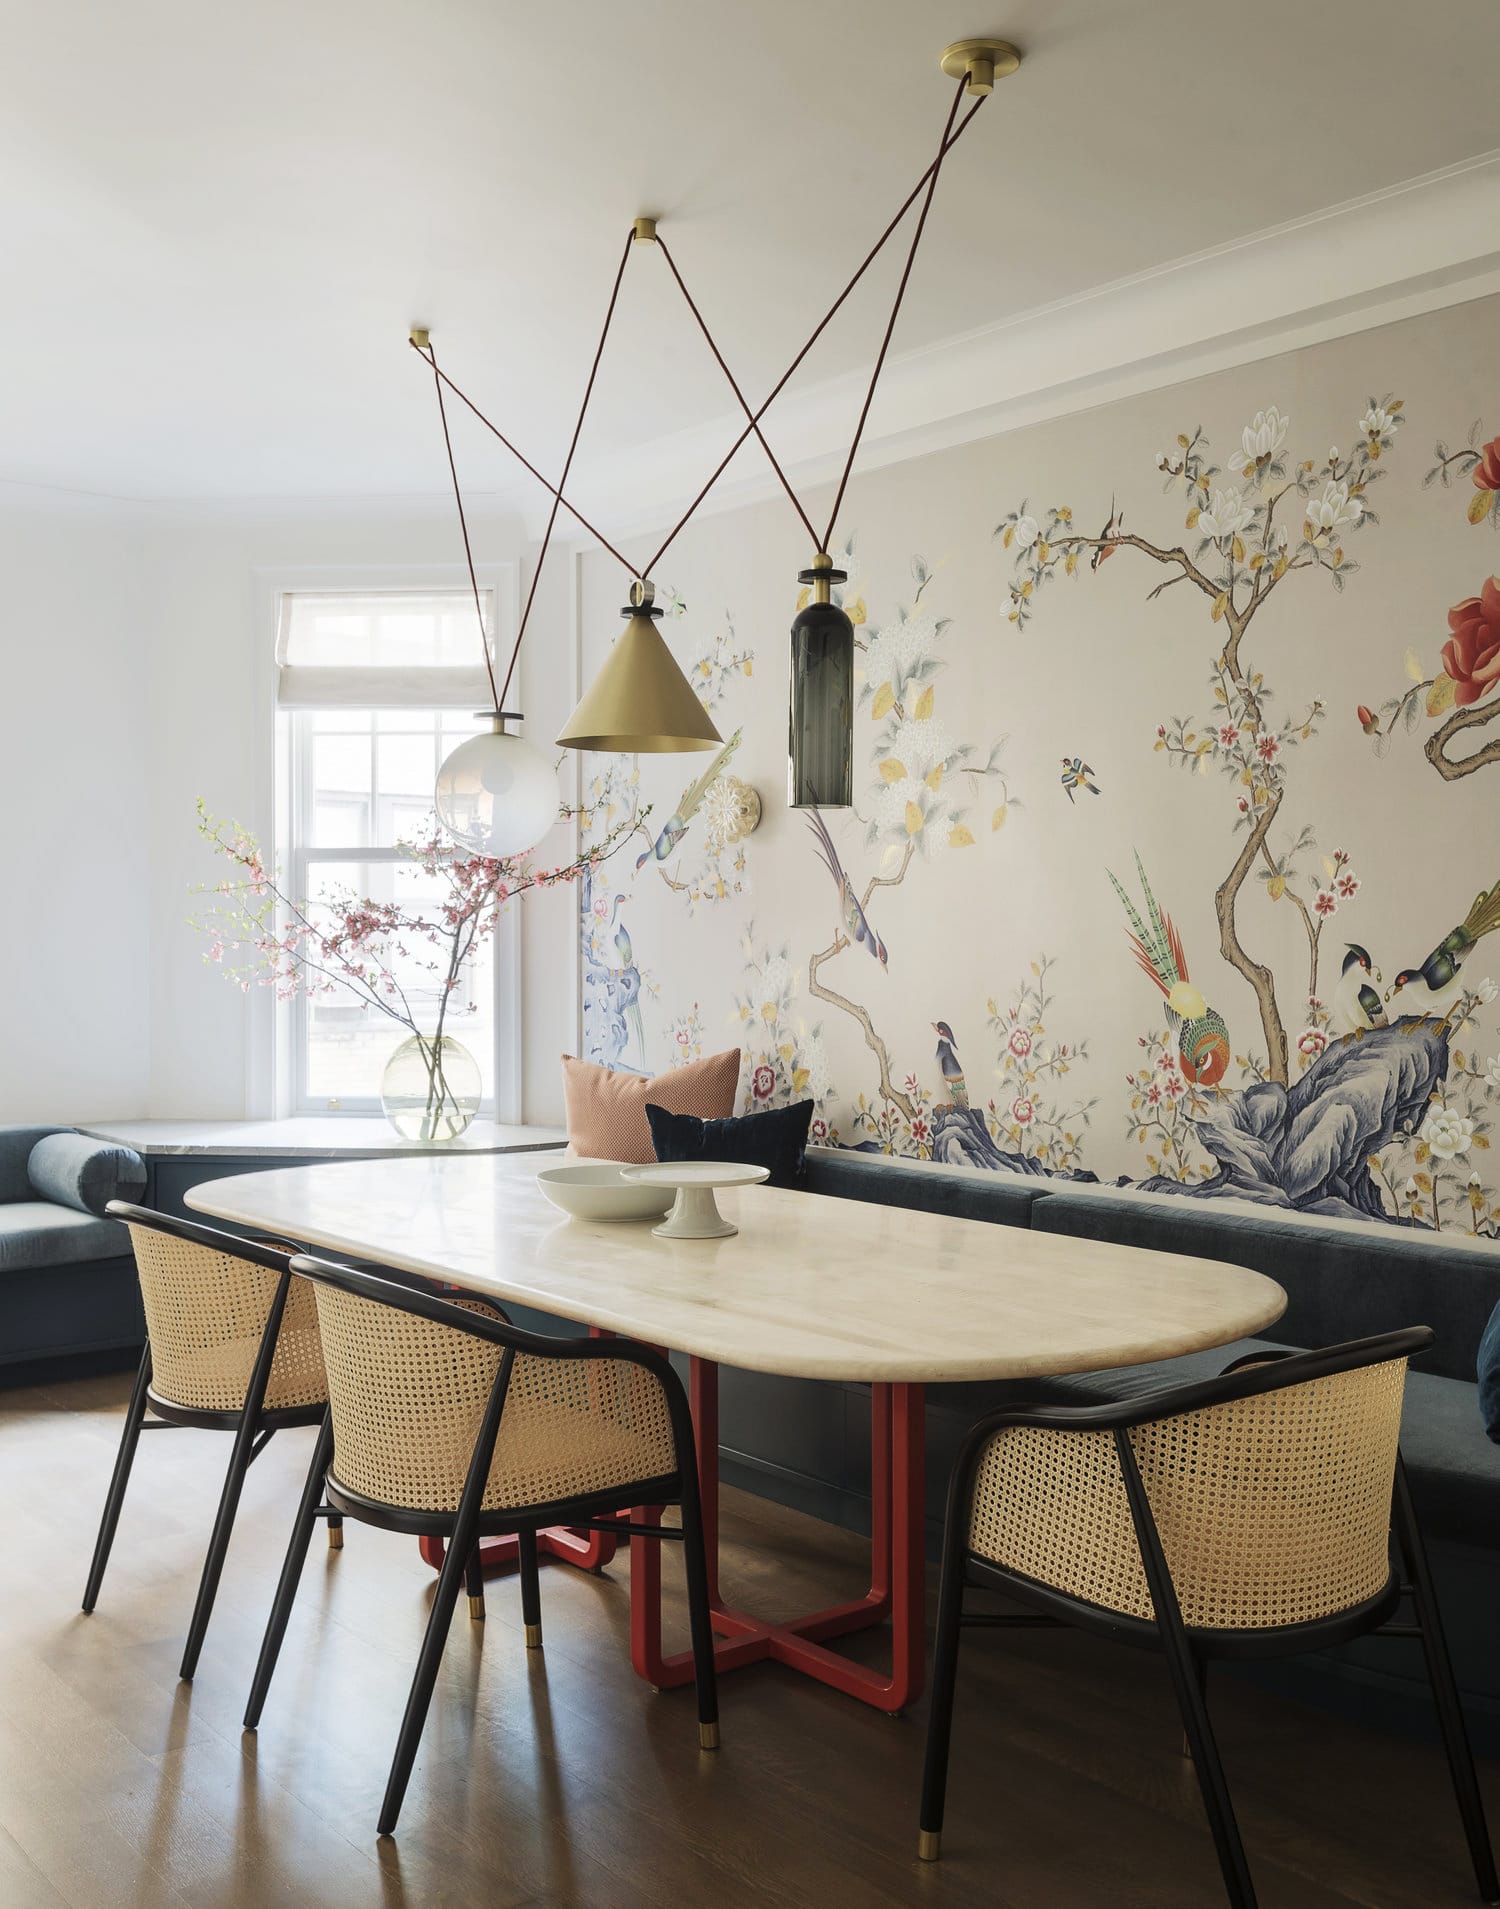 fun lighting and chinoiserie wallpaper in the dining room | studio DB park avenue house tour on coco kelley